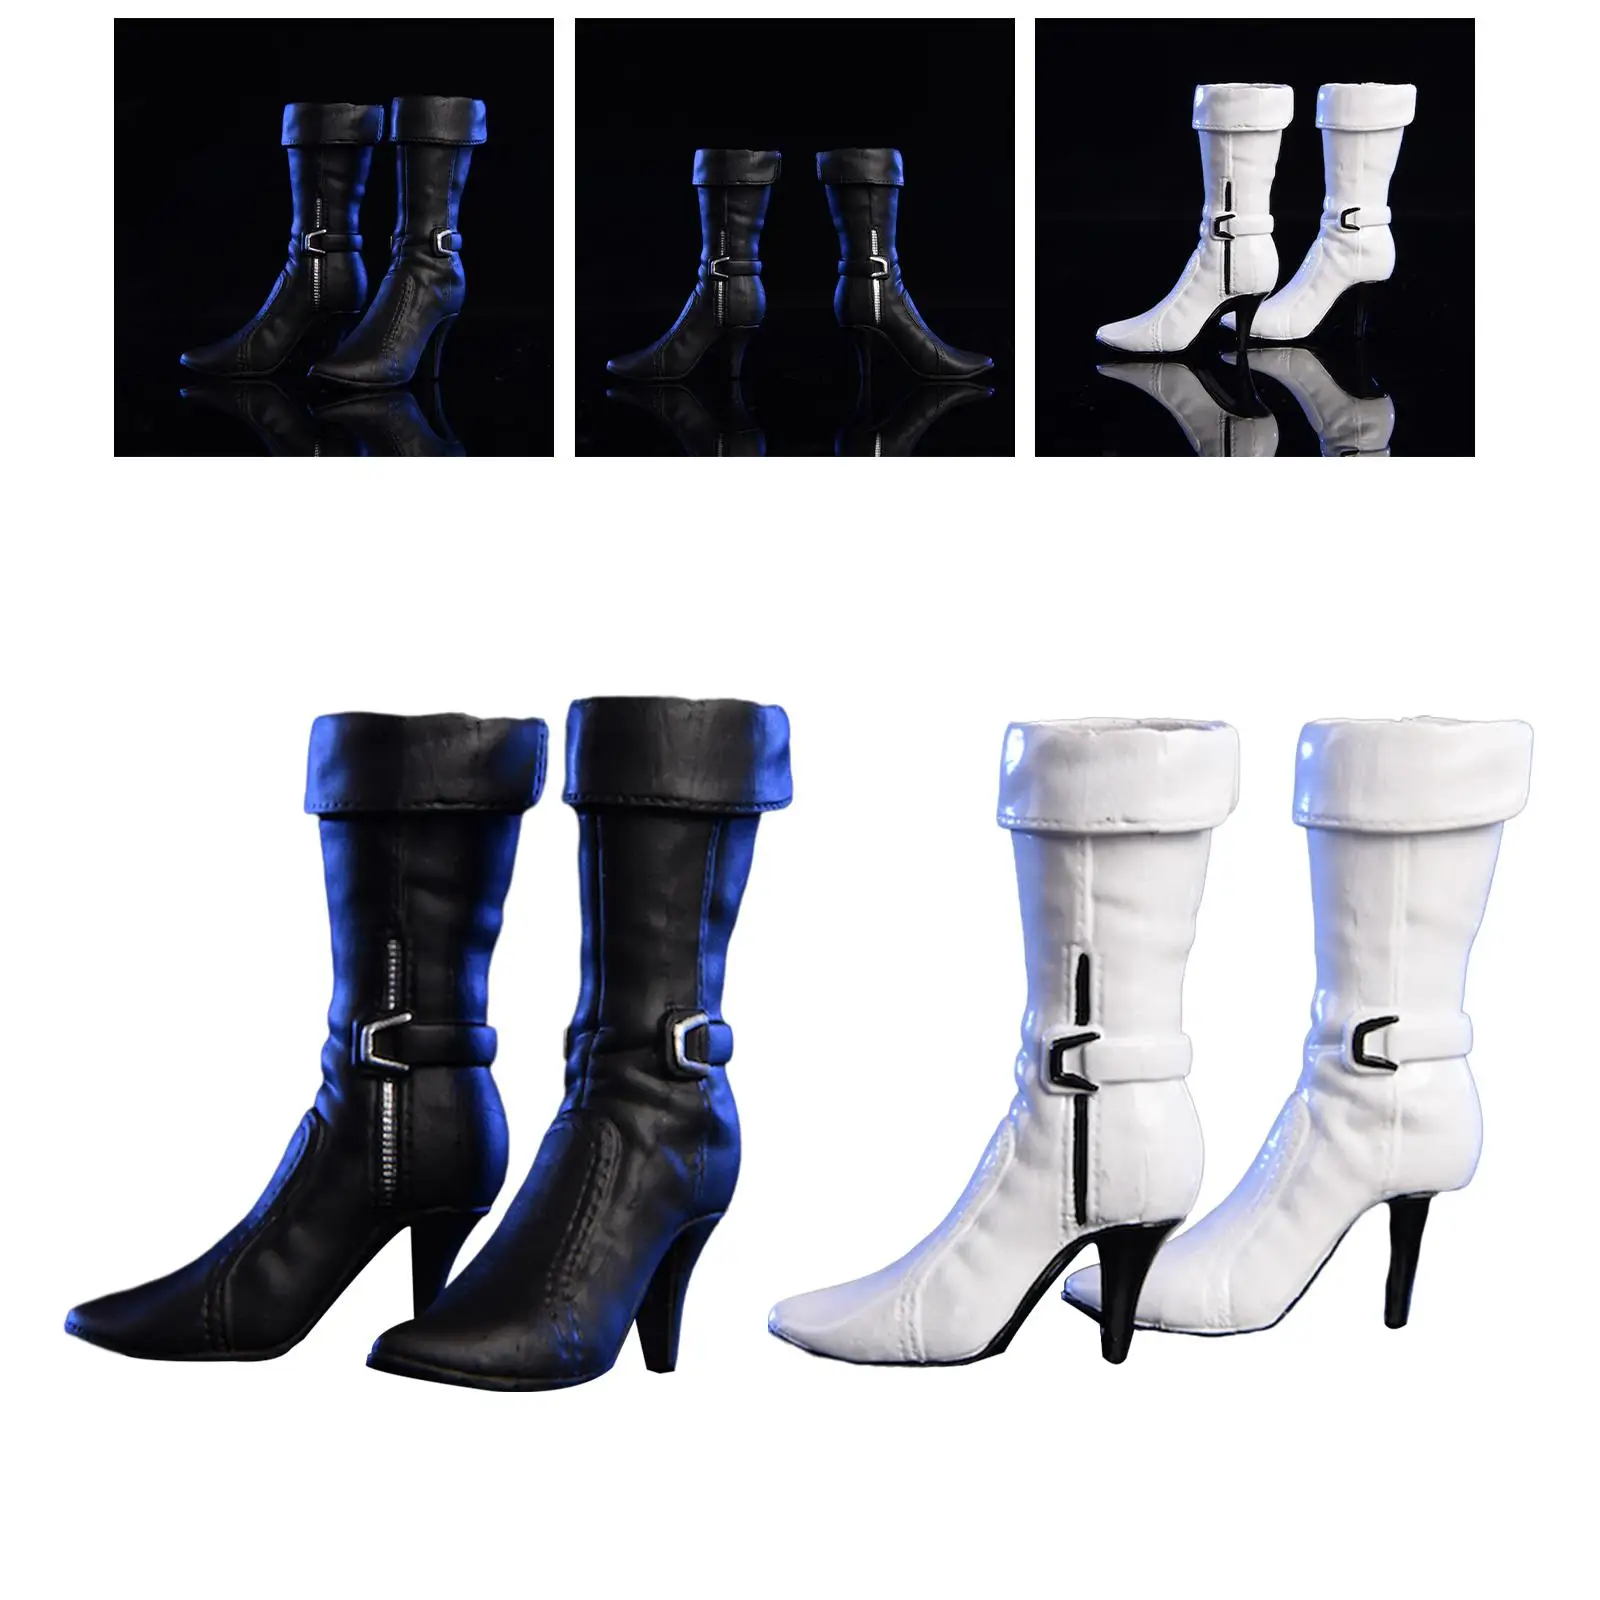 1/6 Scale Figure Shoes PU 3.5 cm Length Shoes High Heeled Shoes for 12 inch Female Action Figure DIY Gift Accessories